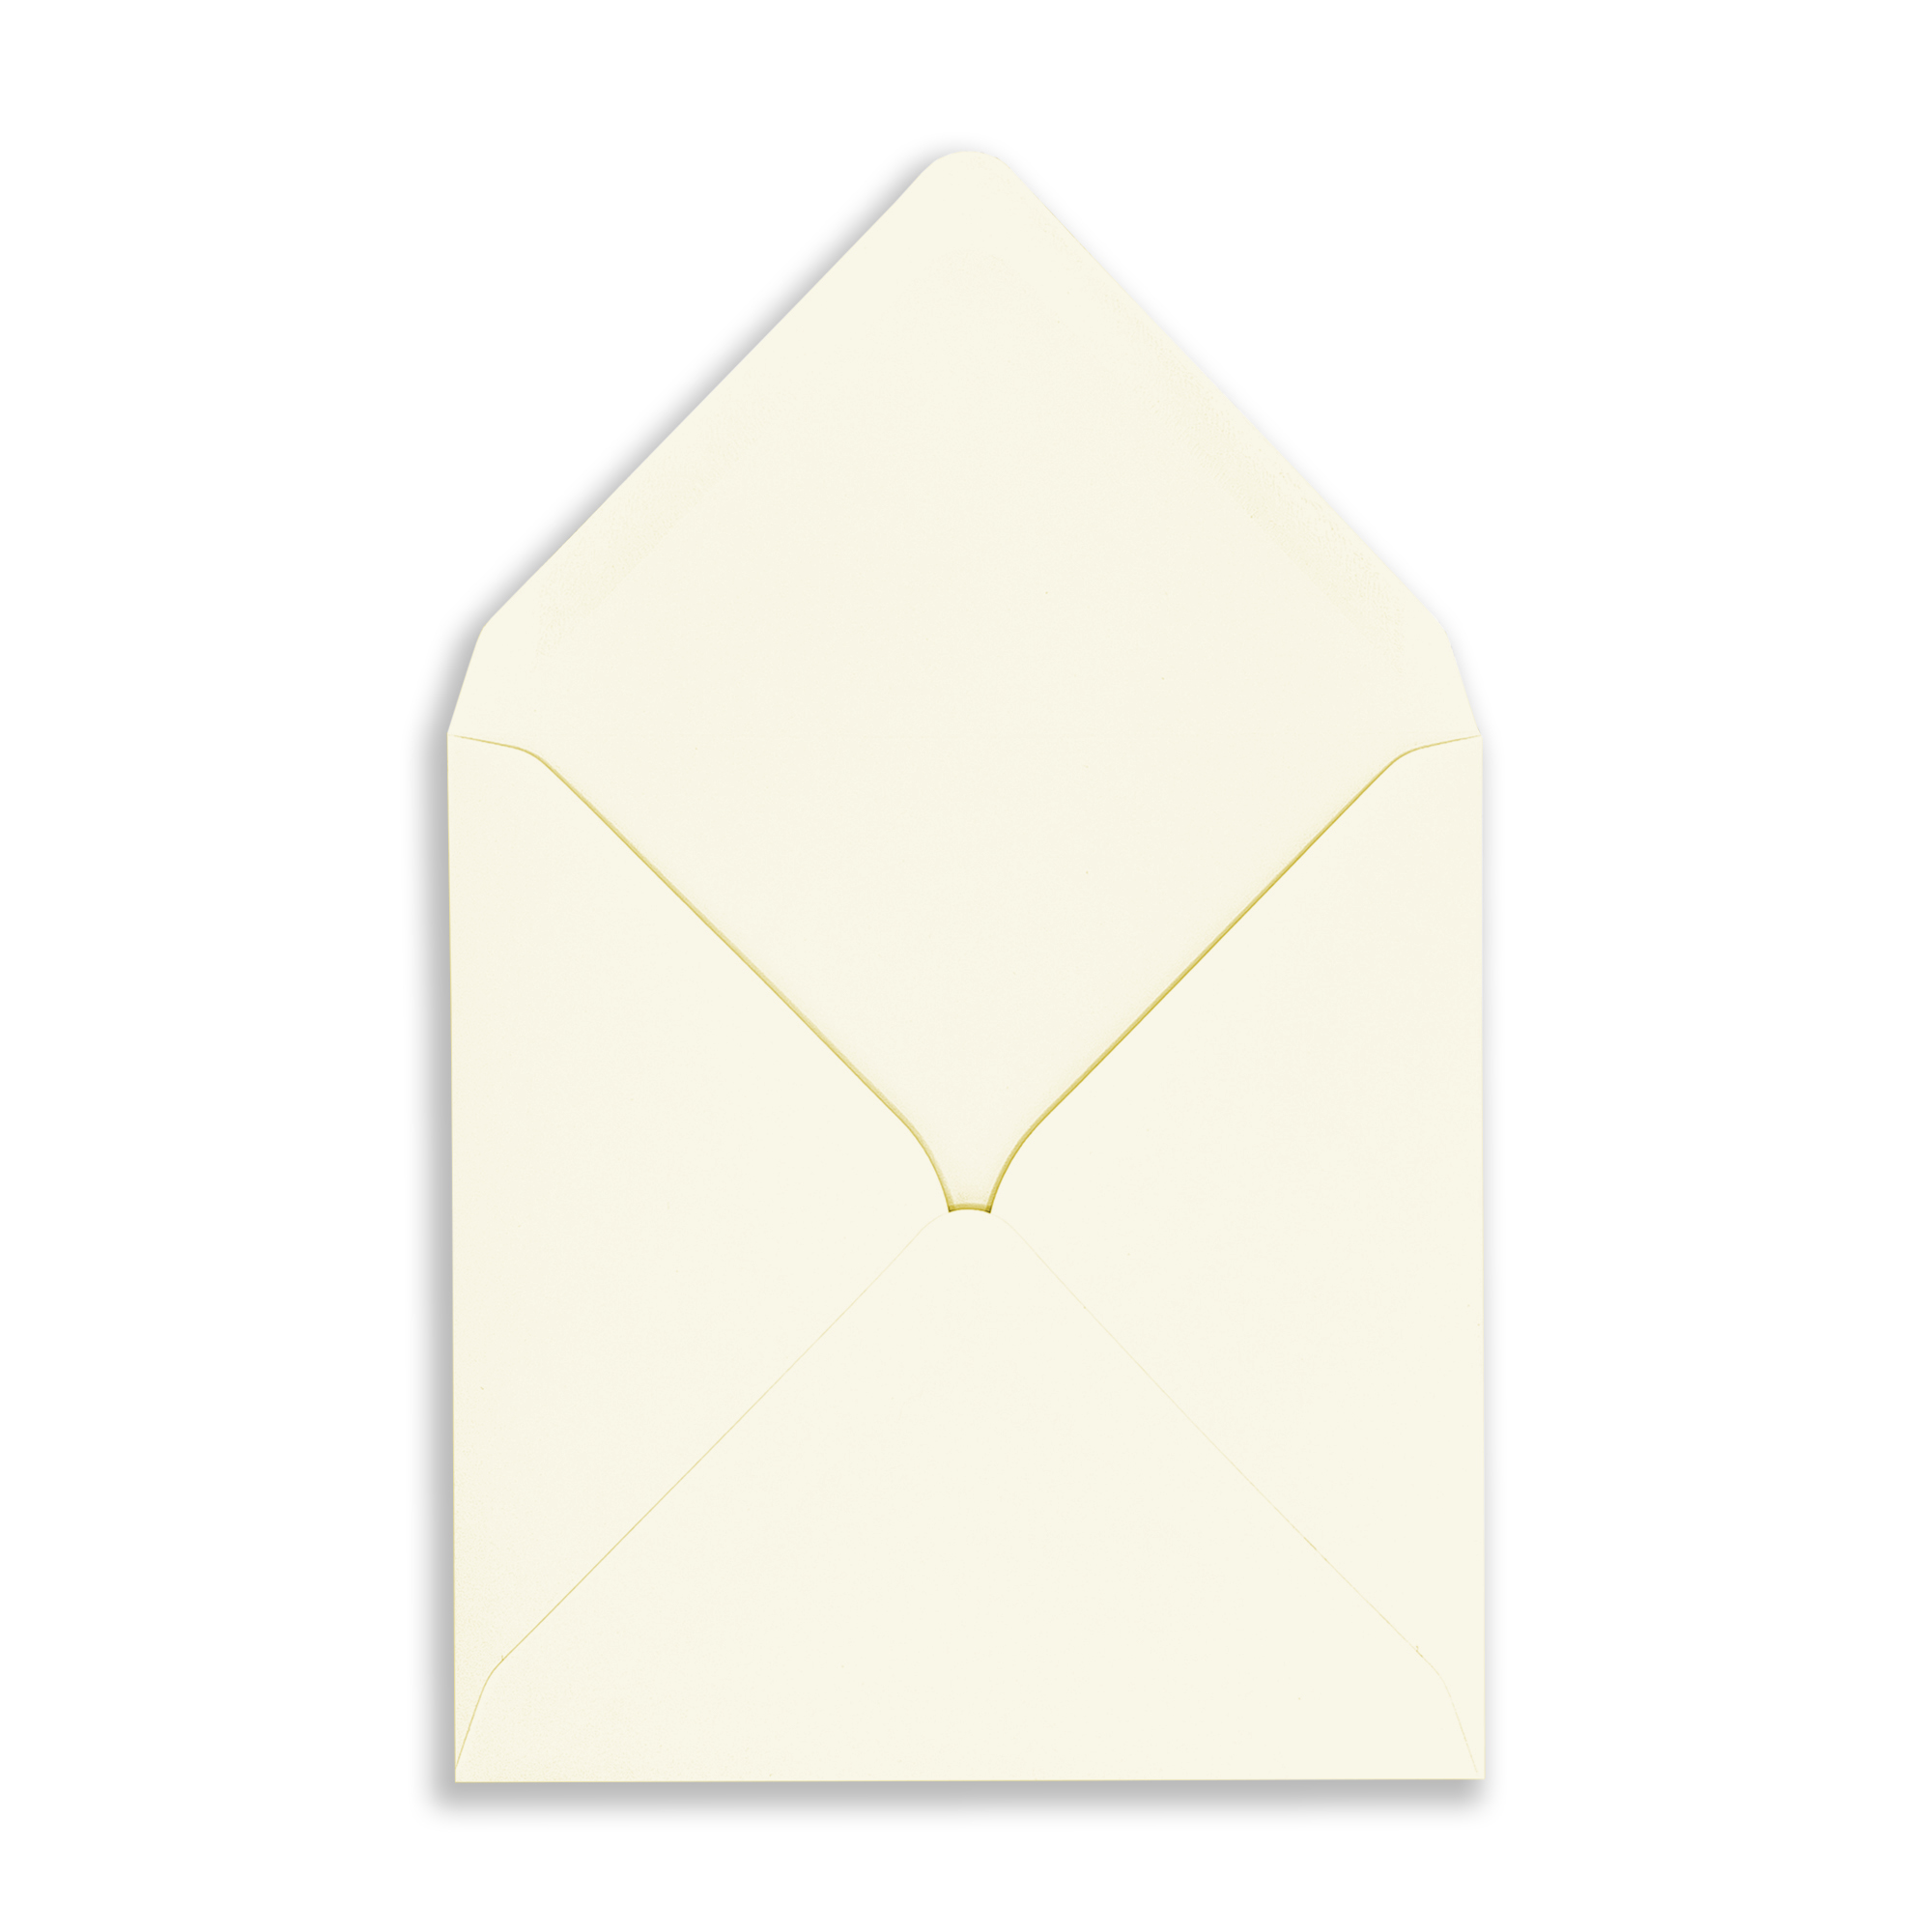 Ivory_Square_Envelope_OpenFlap